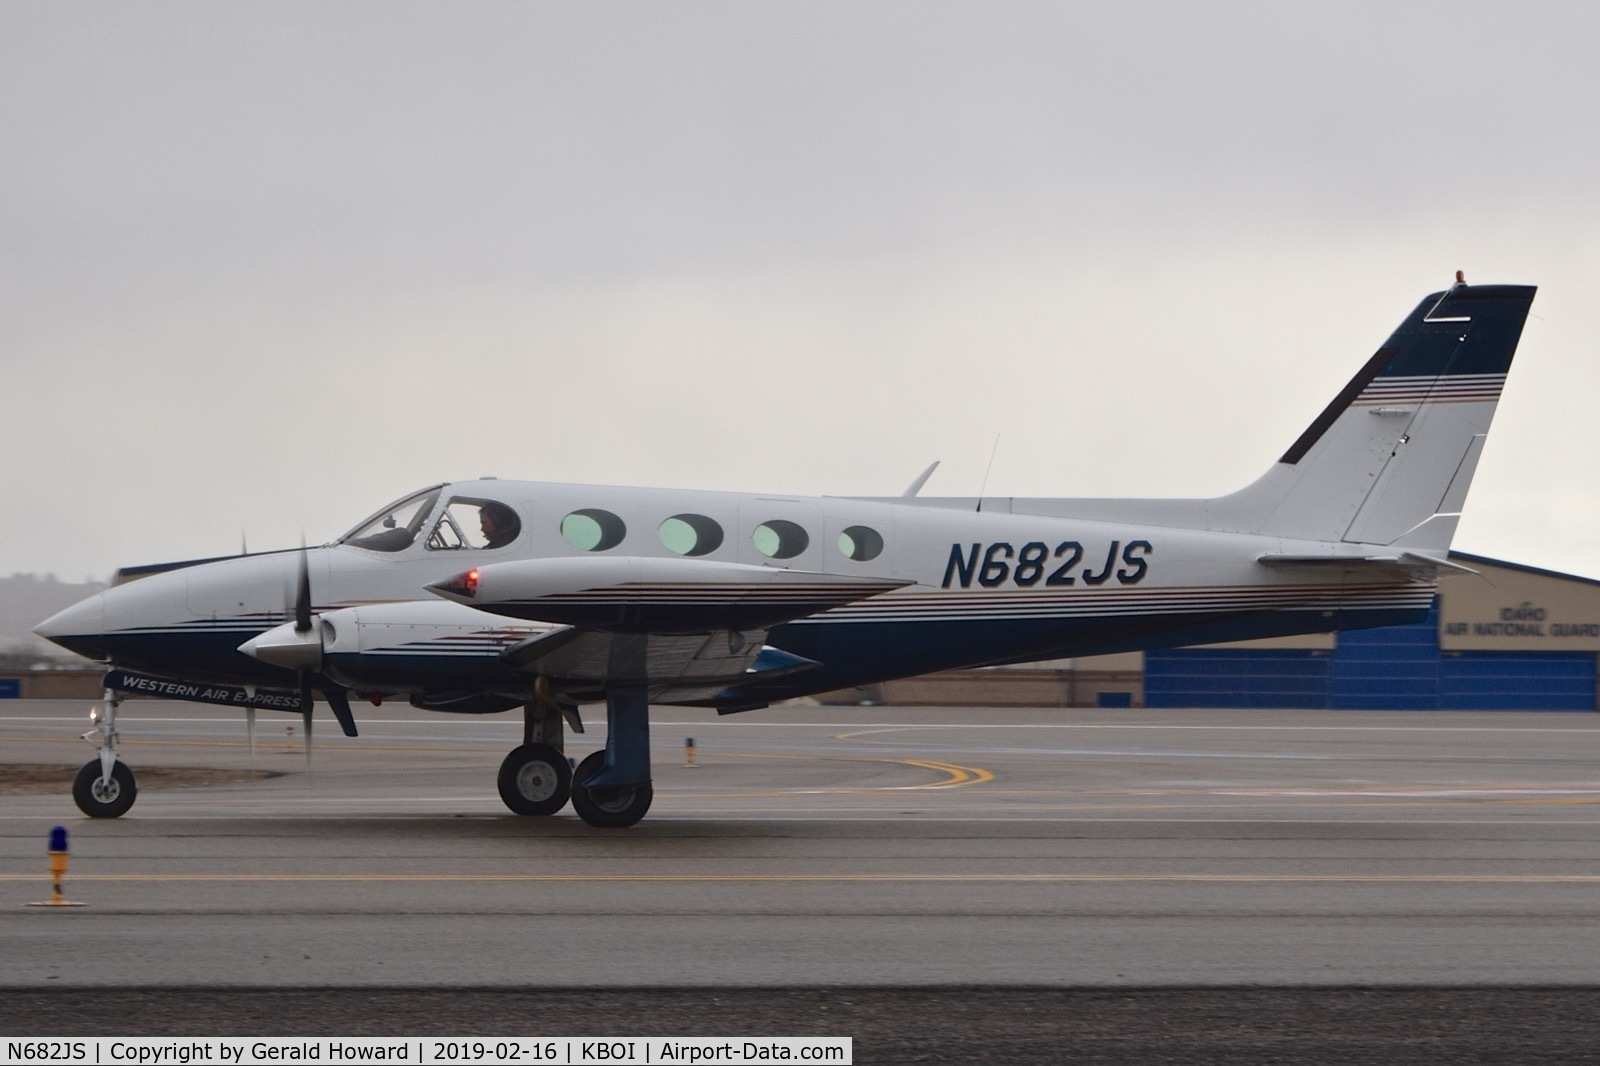 N682JS, 1981 Cessna 340A C/N 340A1237, Taxiing on Alpha.